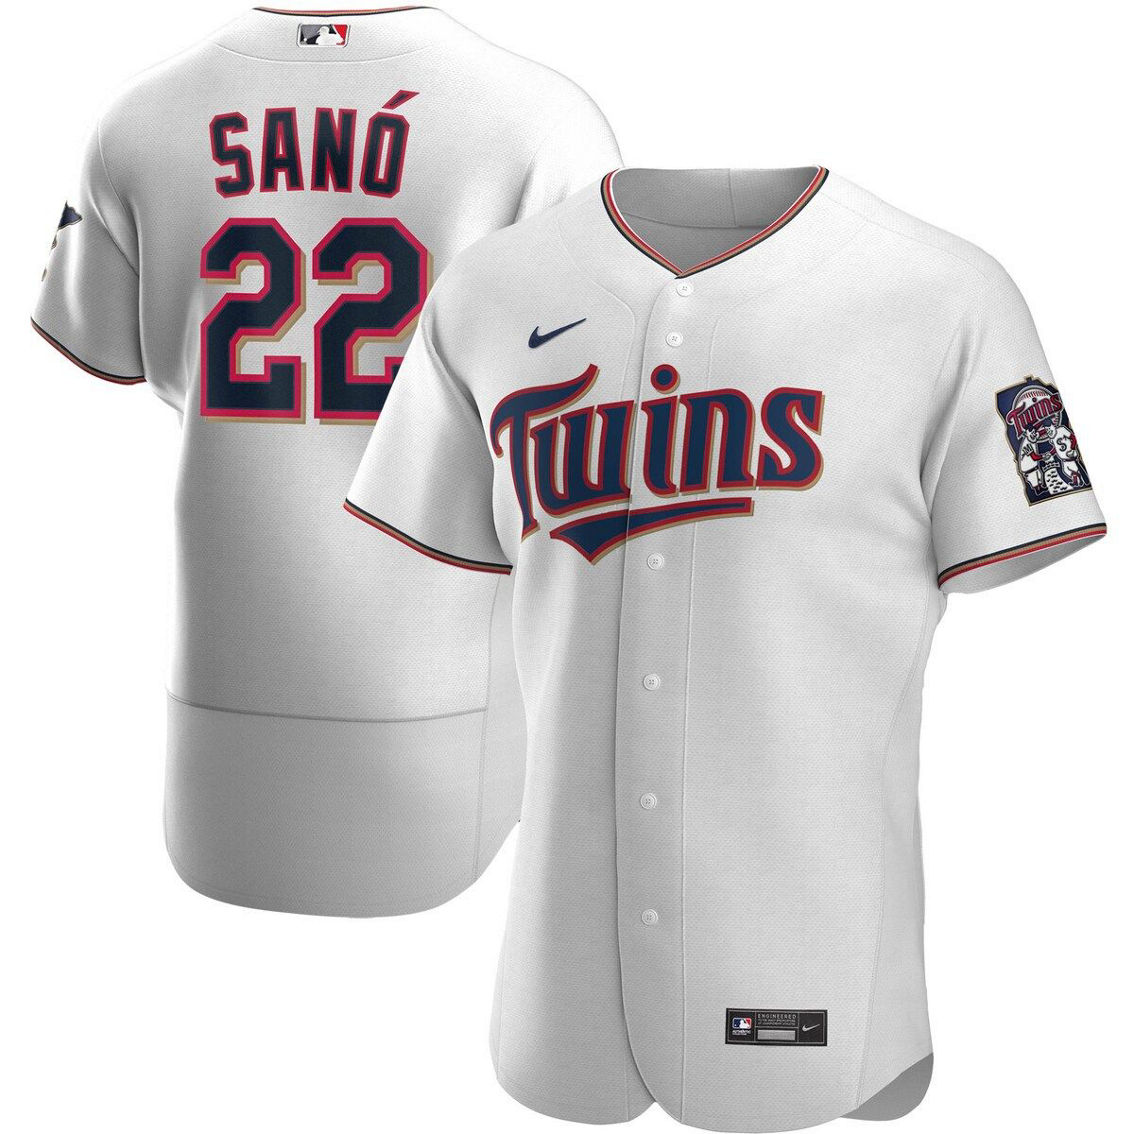 Nike Men's Miguel Sano White Minnesota Twins Home Authentic Player Jersey - Image 2 of 4